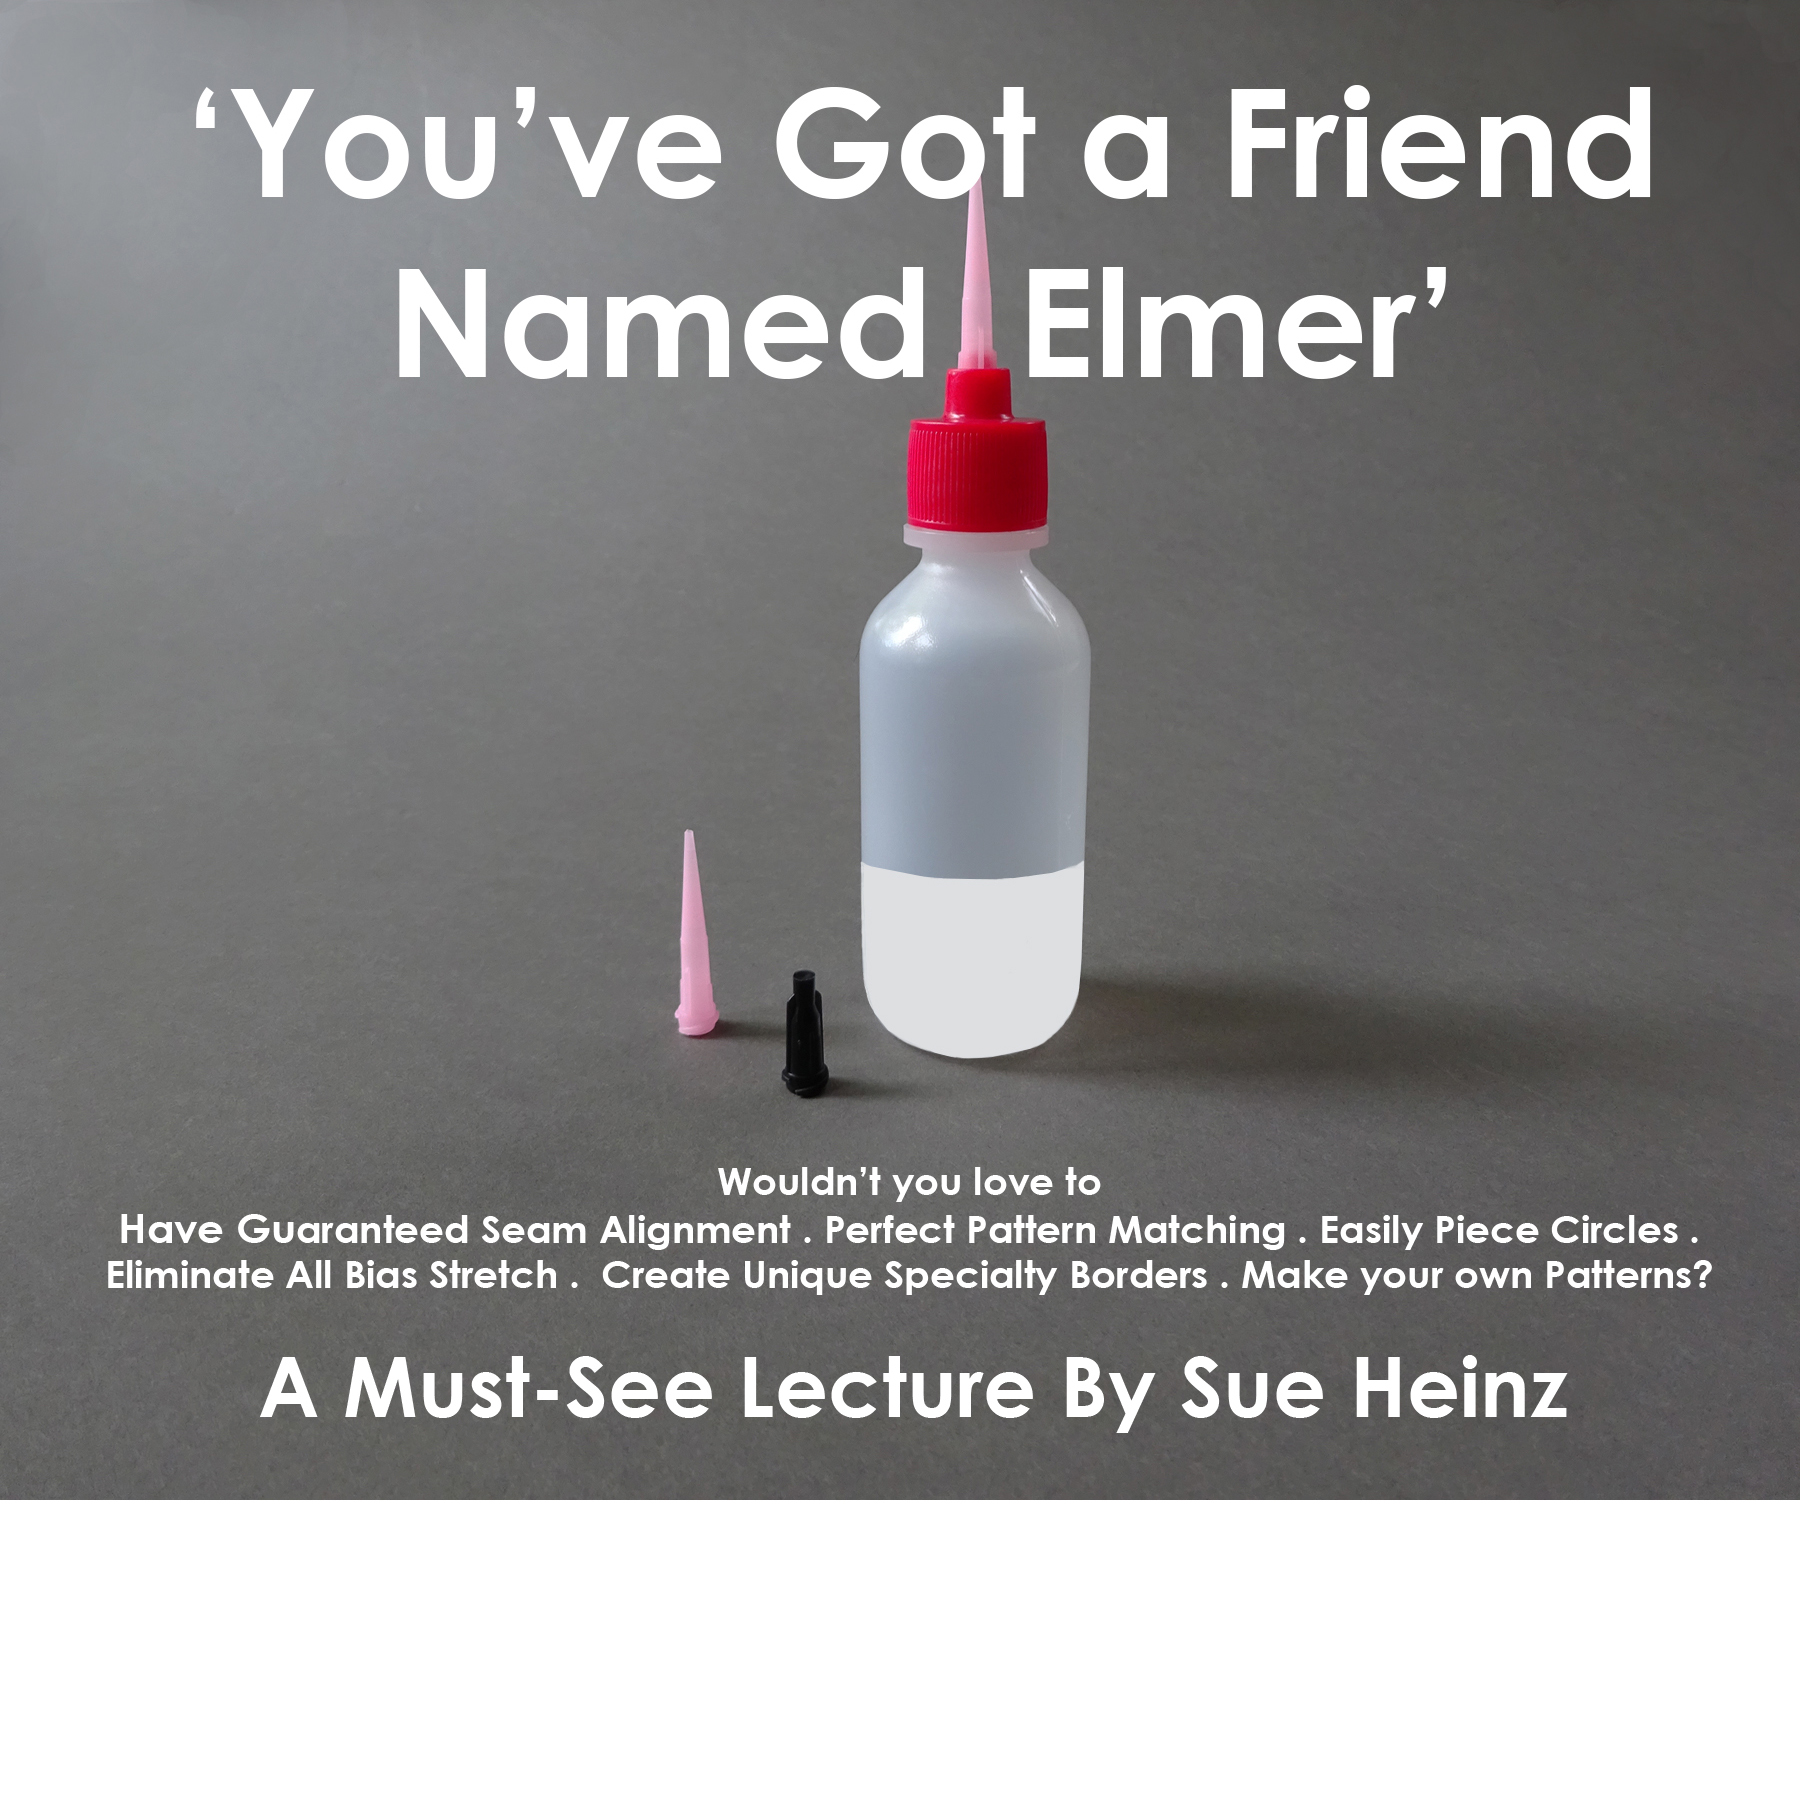 Featured image for “You've Got a Friend Named Elmer”